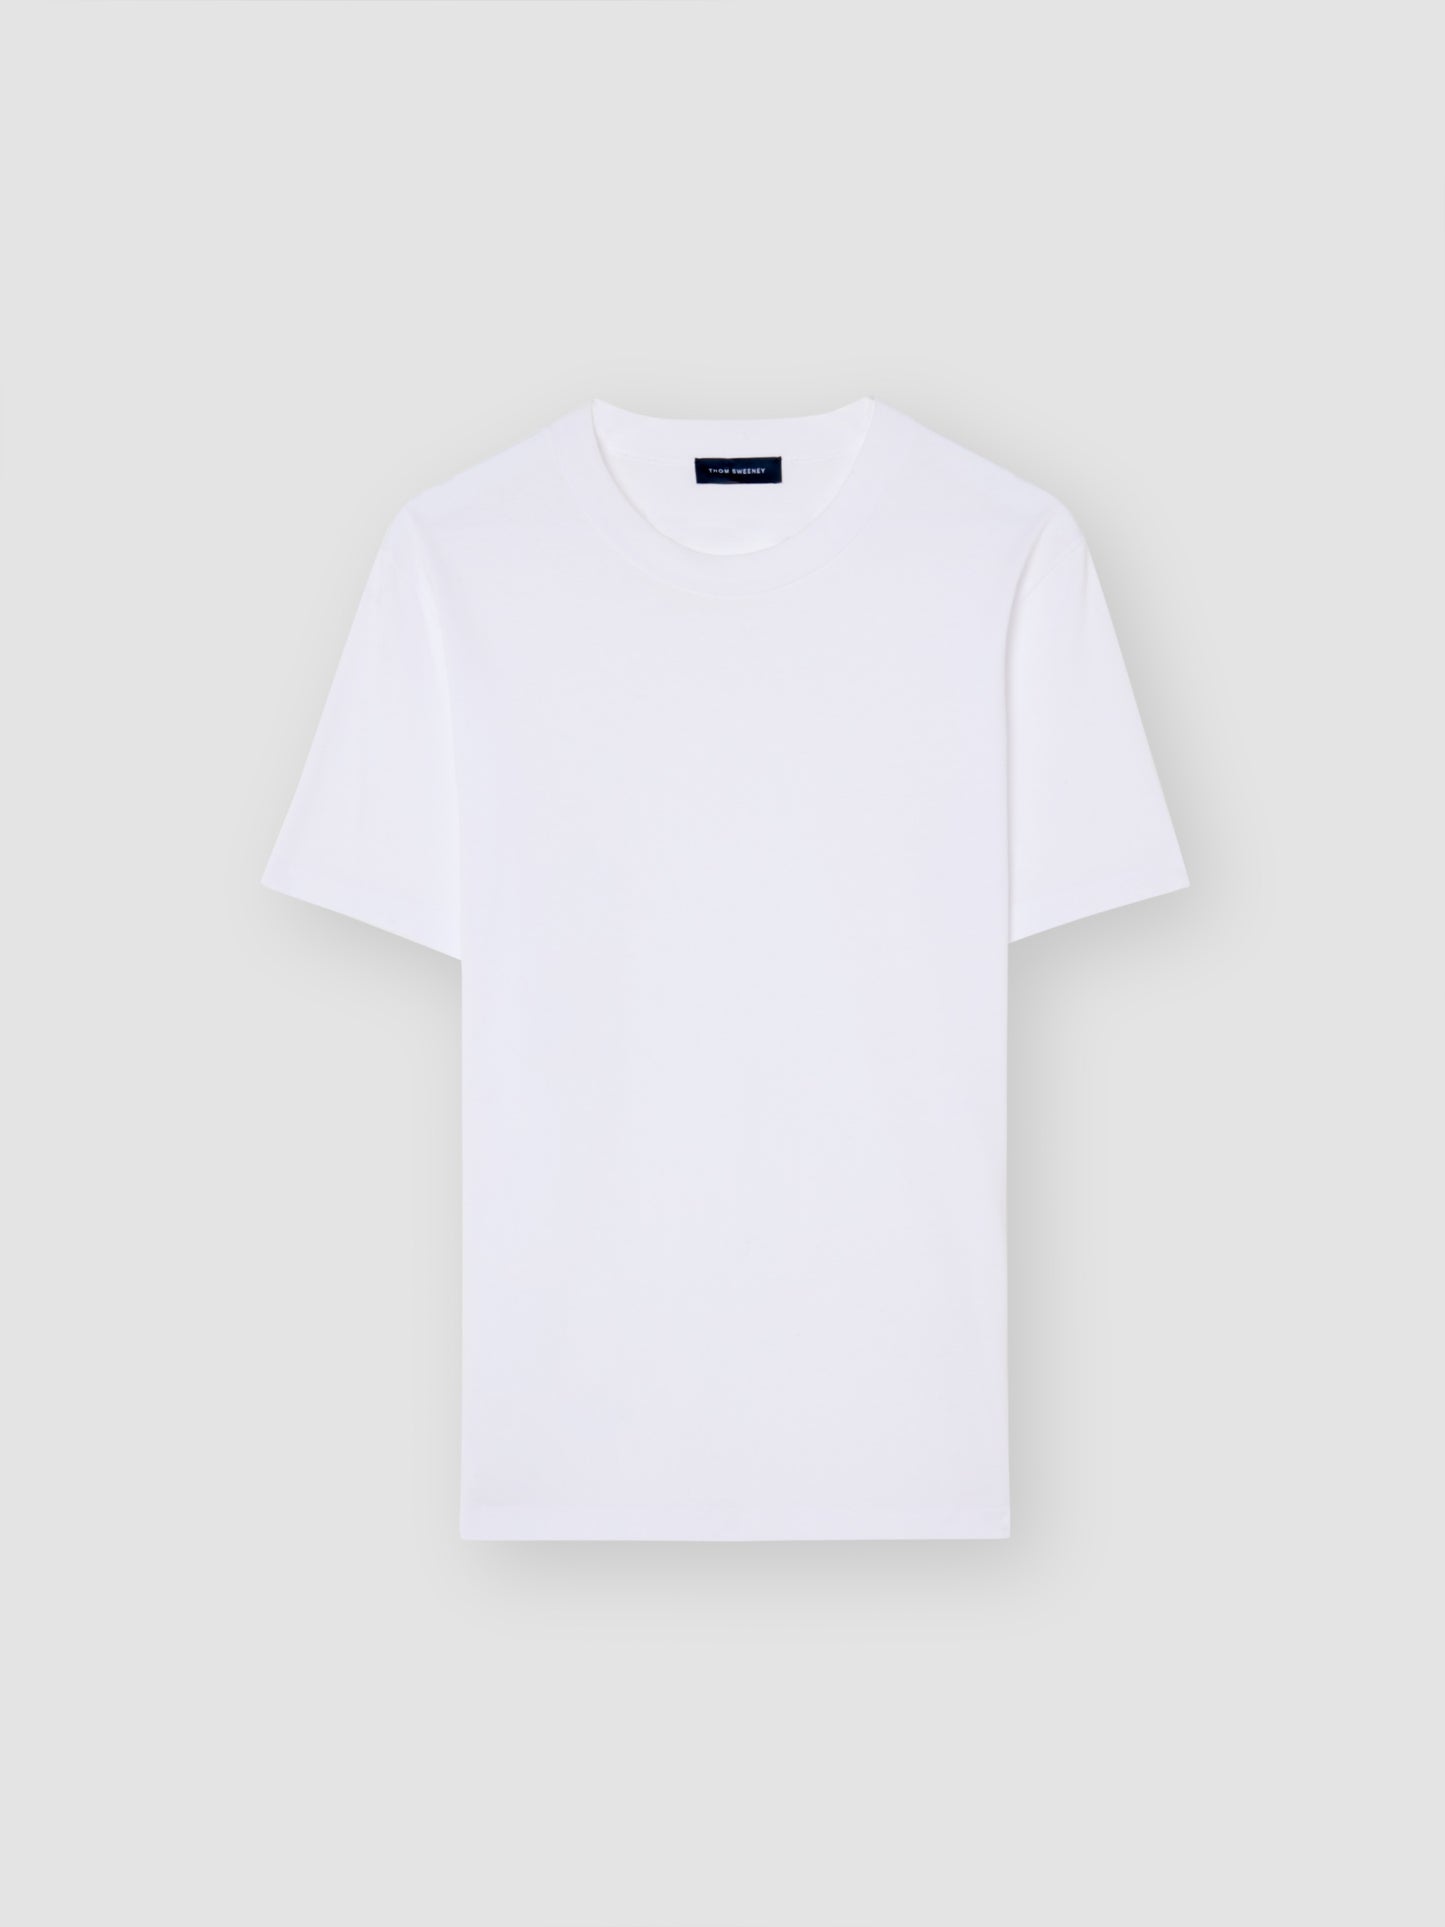 Cotton Wide Collar Classic T-Shirt White Product Image